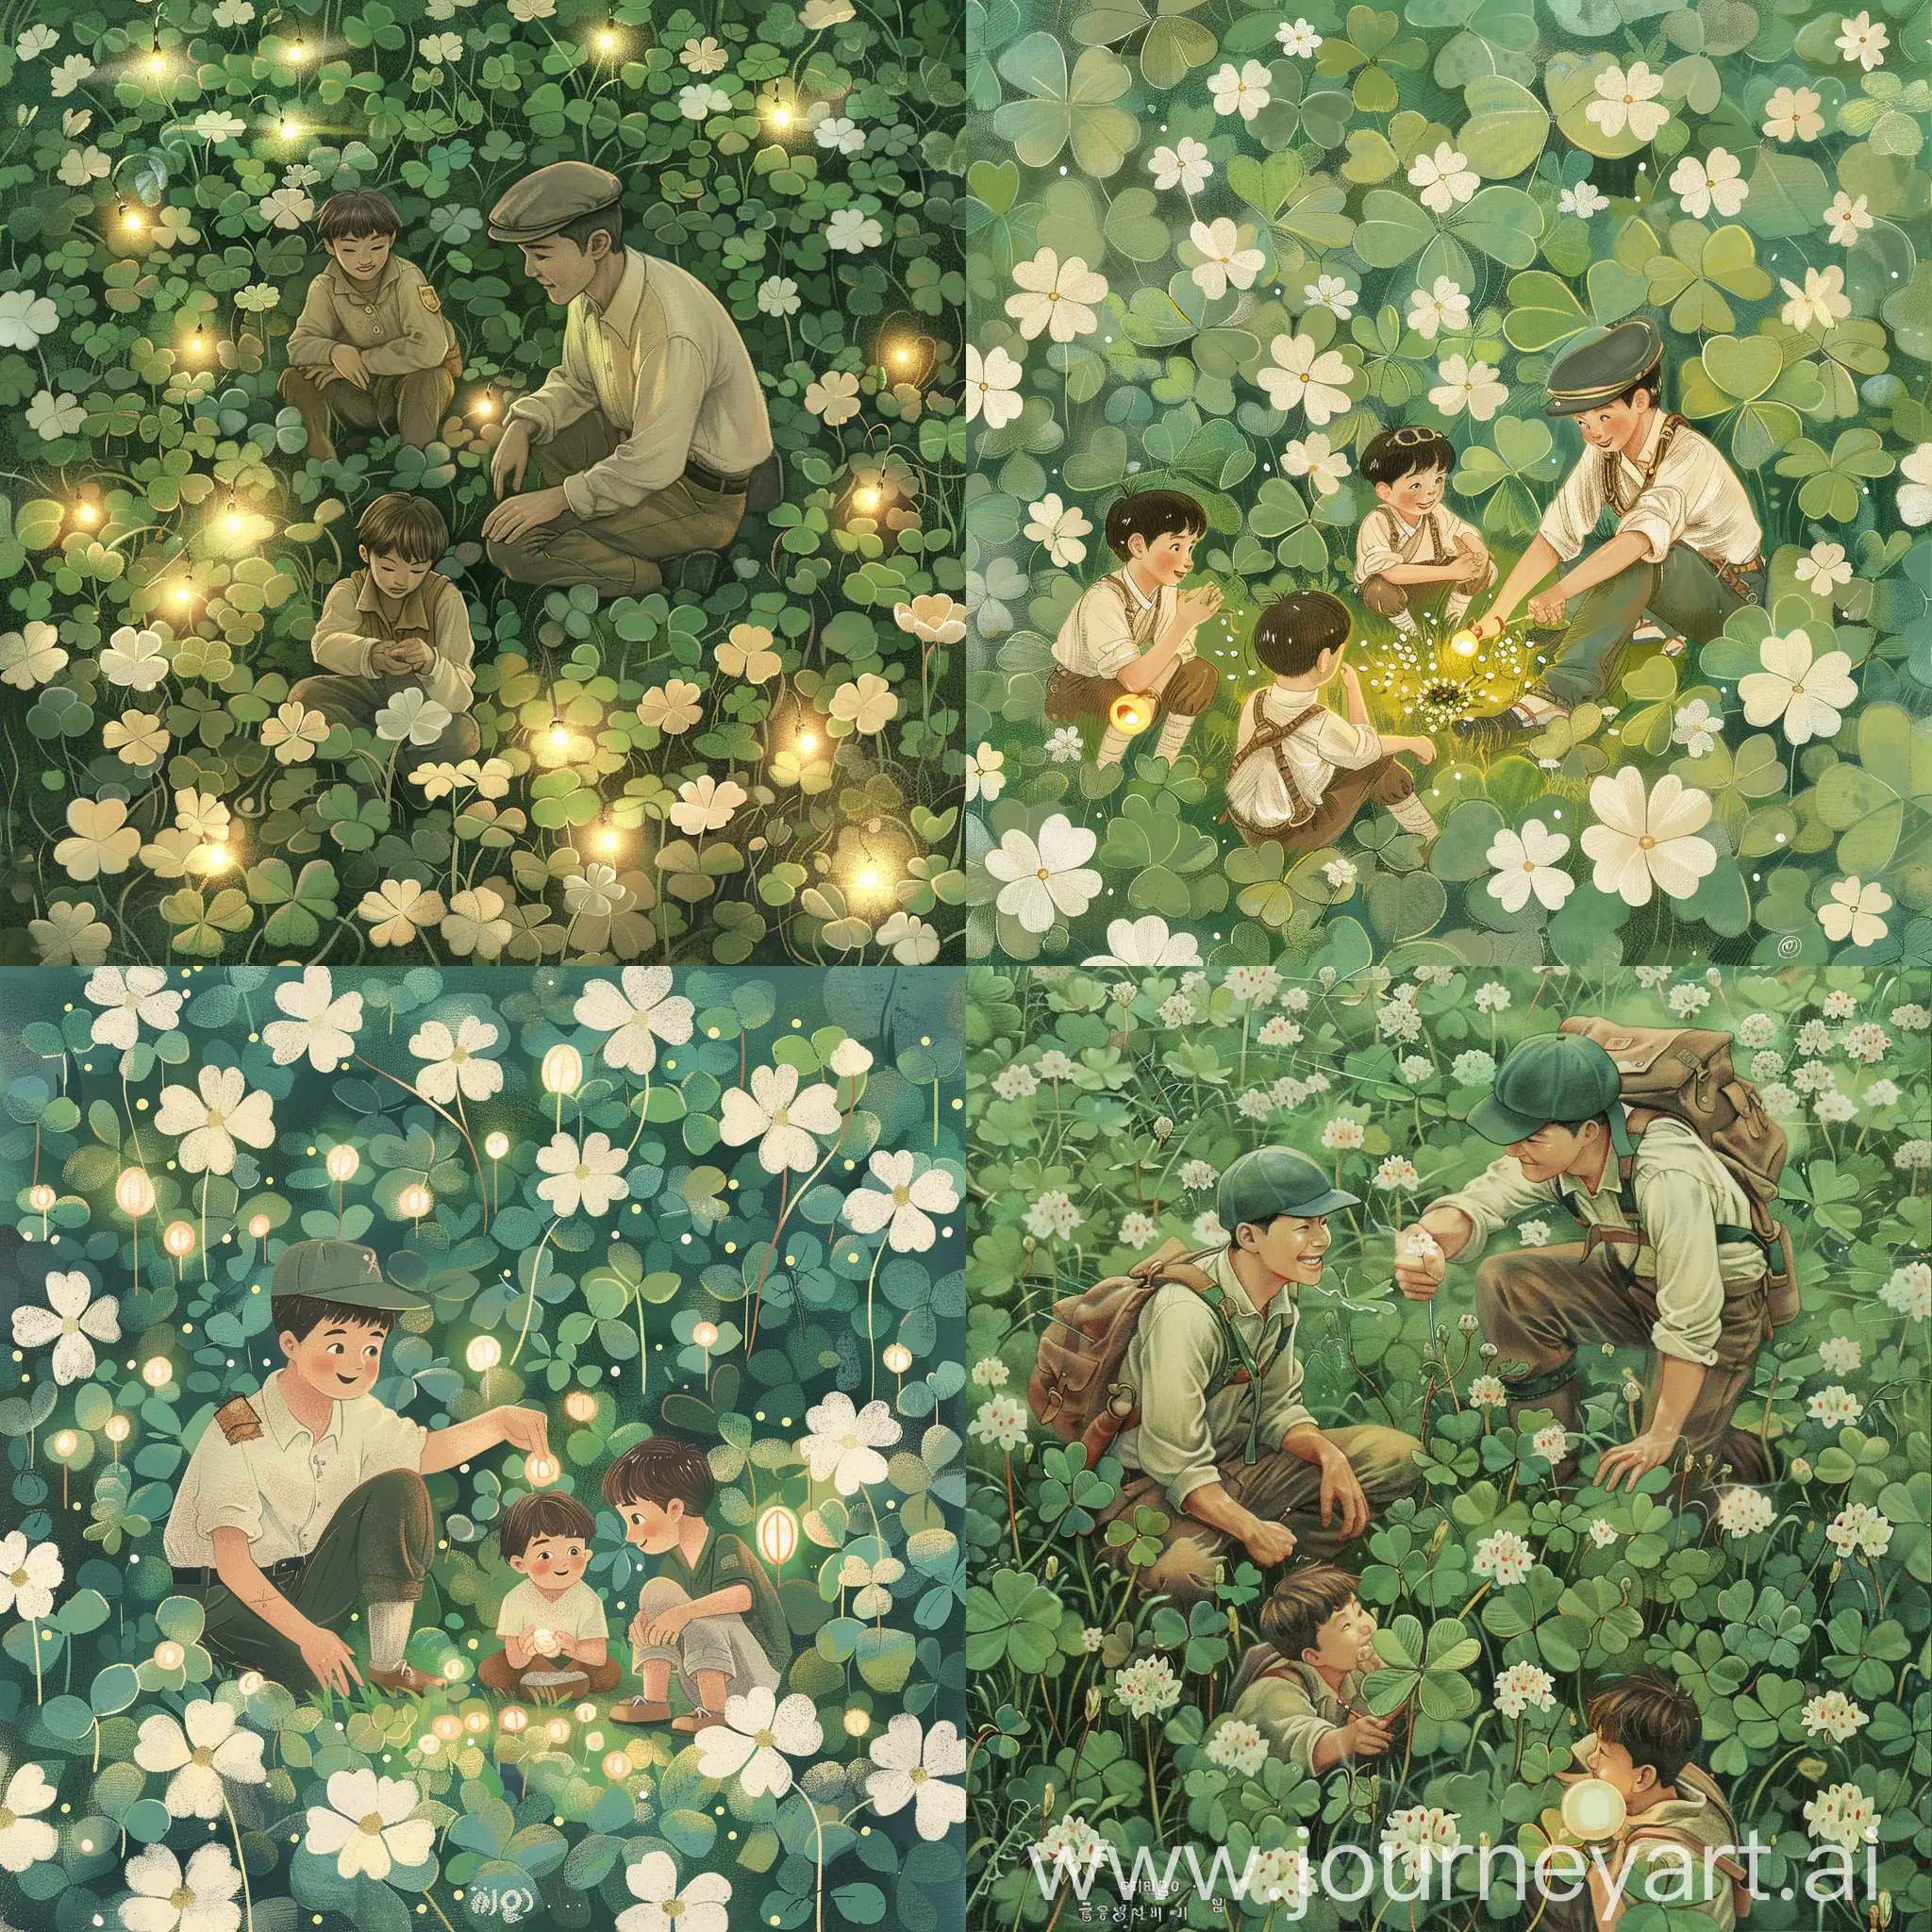 Fantasy-Exploration-Korean-Male-Explorer-and-Curious-Boys-Amidst-Mystery-Clover-White-Flowers